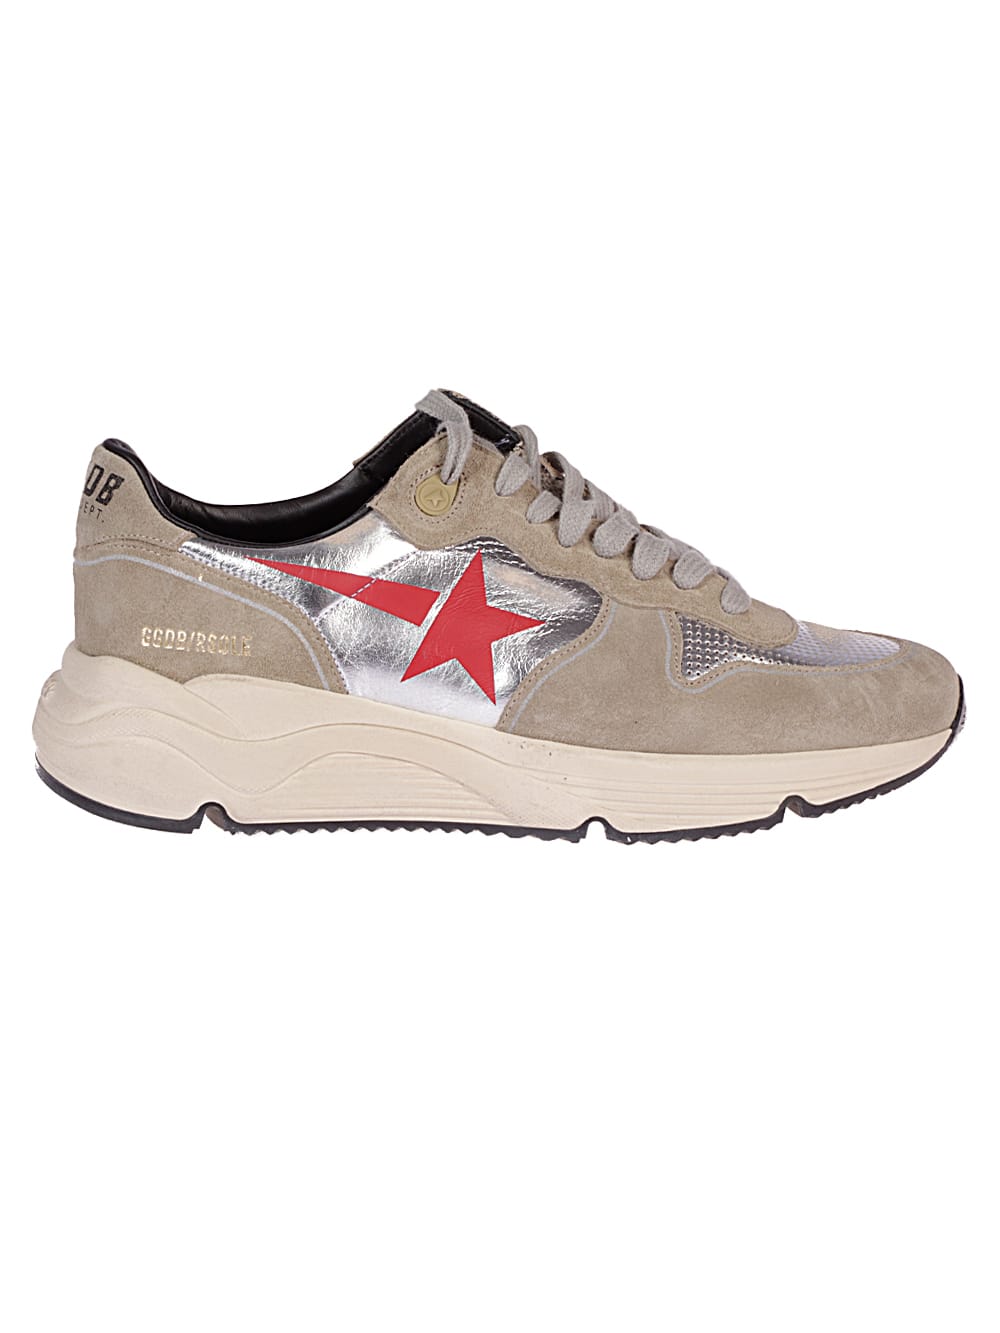 Golden Goose Running Sole Suede Toe And Spur Forated Toe Box La